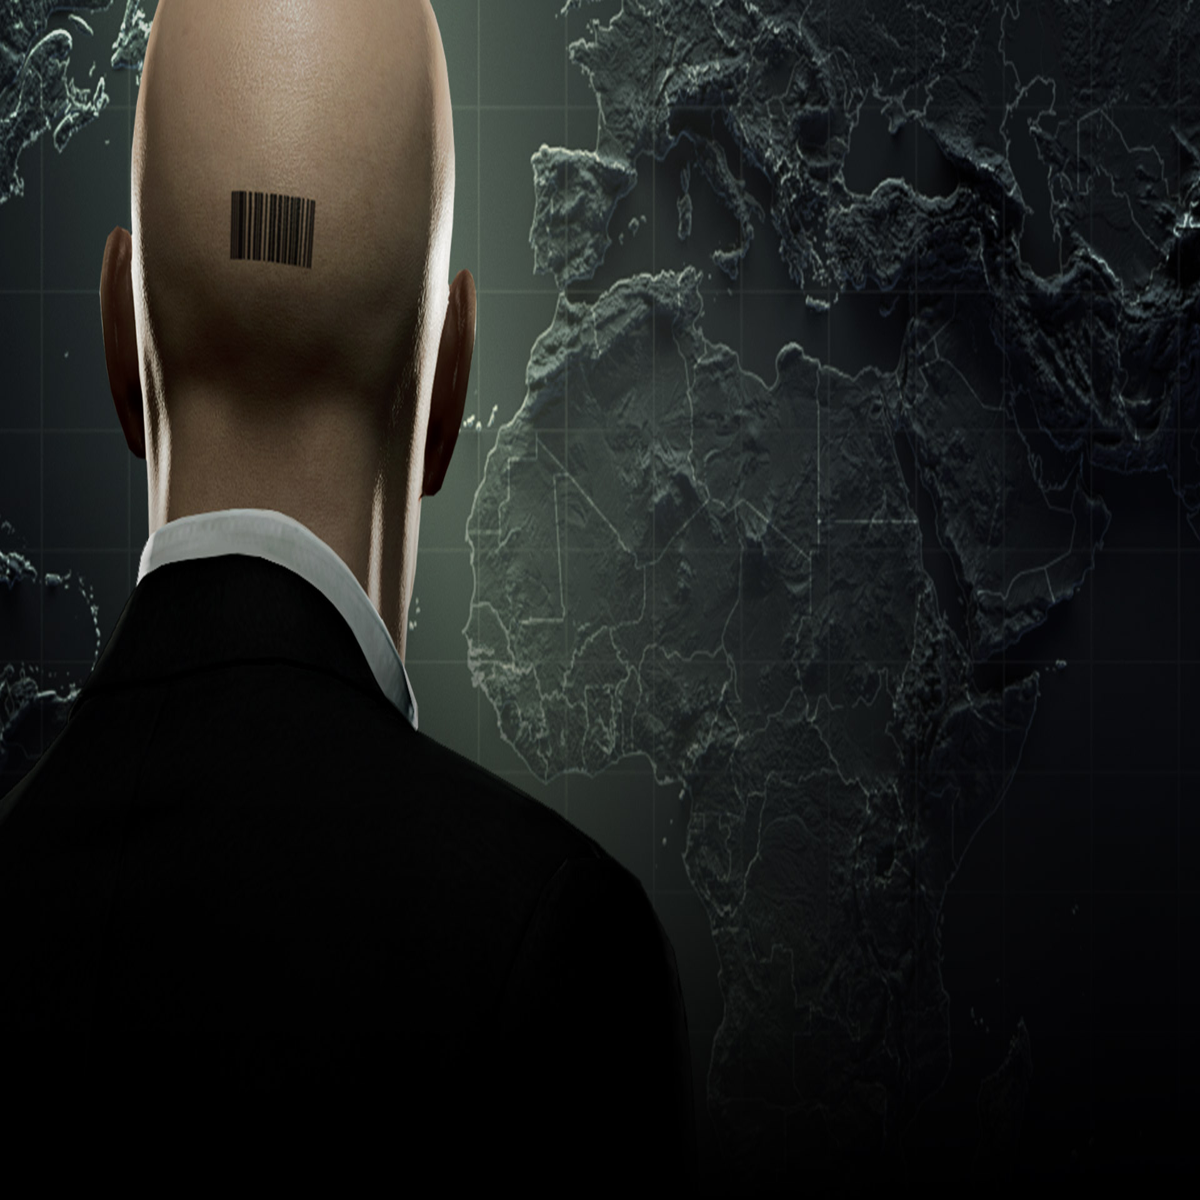 Hitman III: 10 Facts To Know About The Freelancer Game Mode